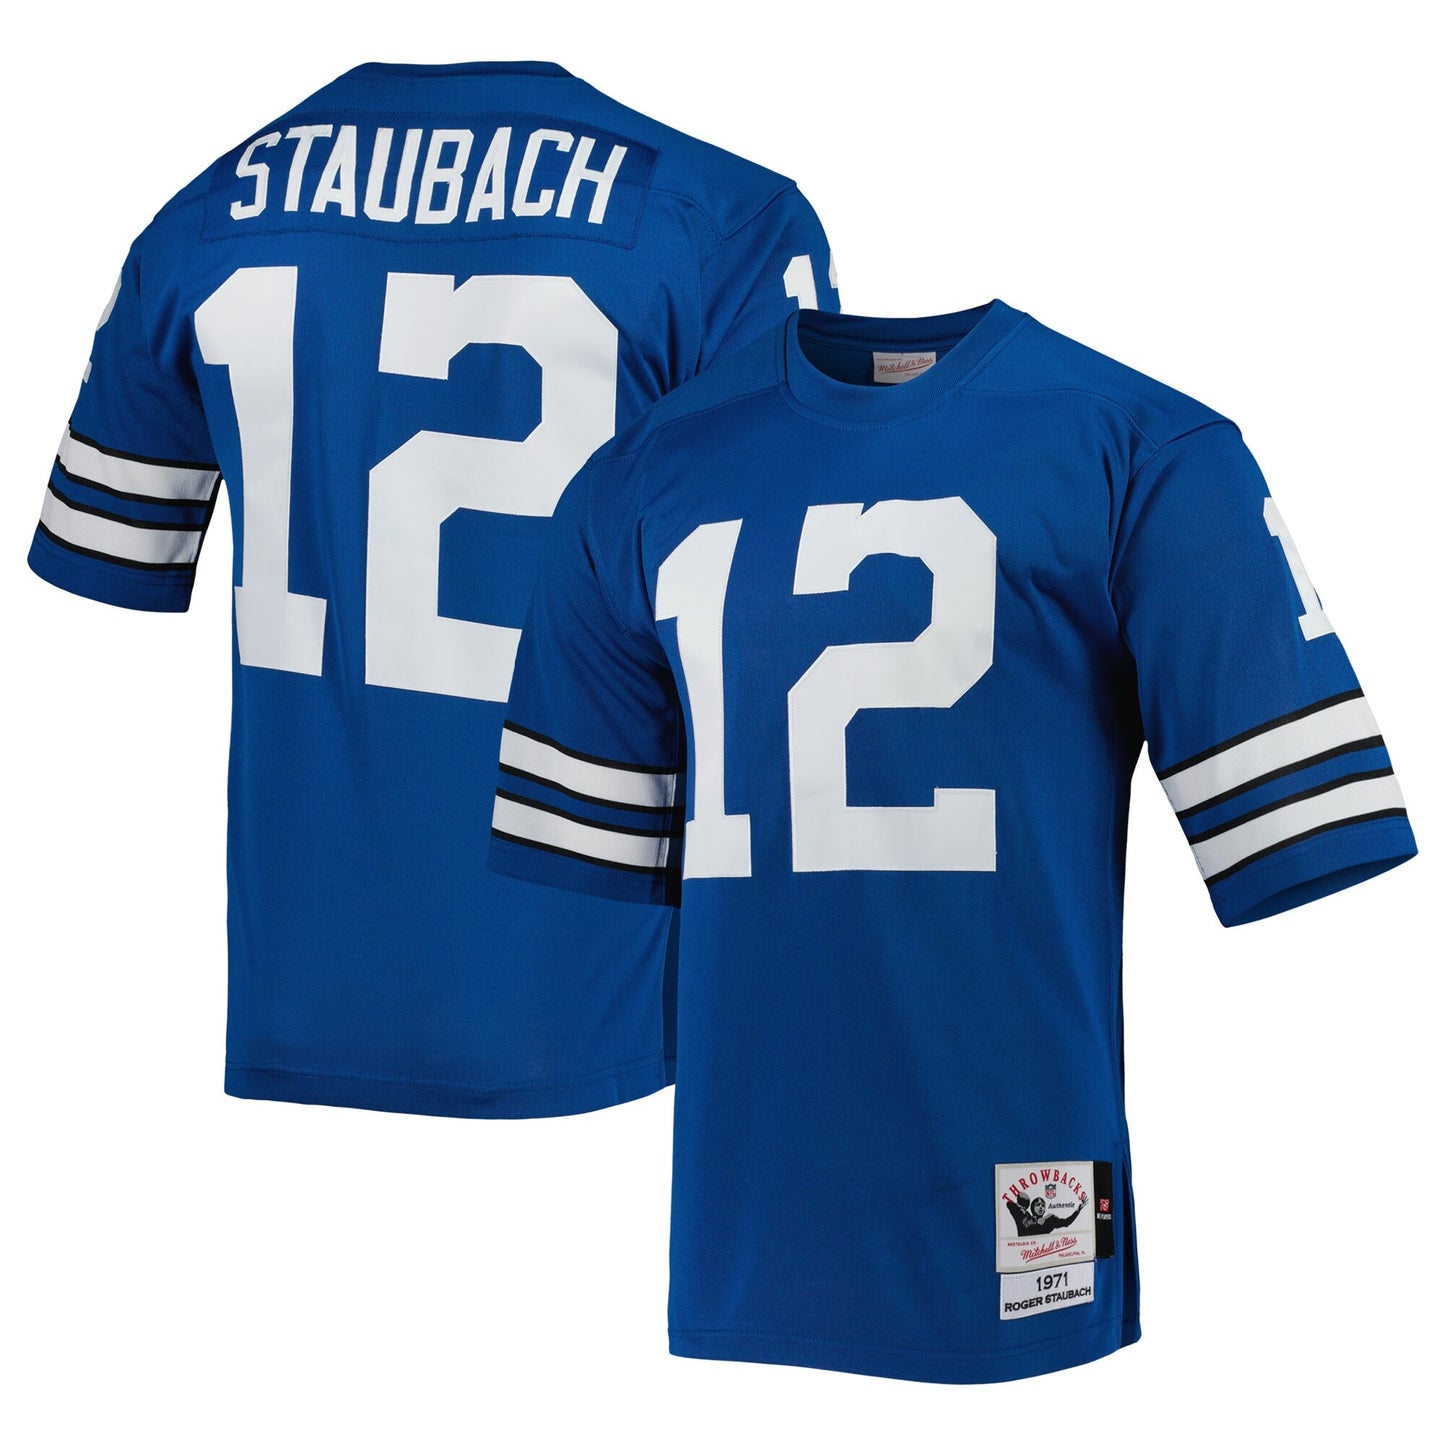 Roger Staubach Dallas Cowboys Mitchell & Ness 1971 Authentic Throwback Retired Player Jersey - Blue